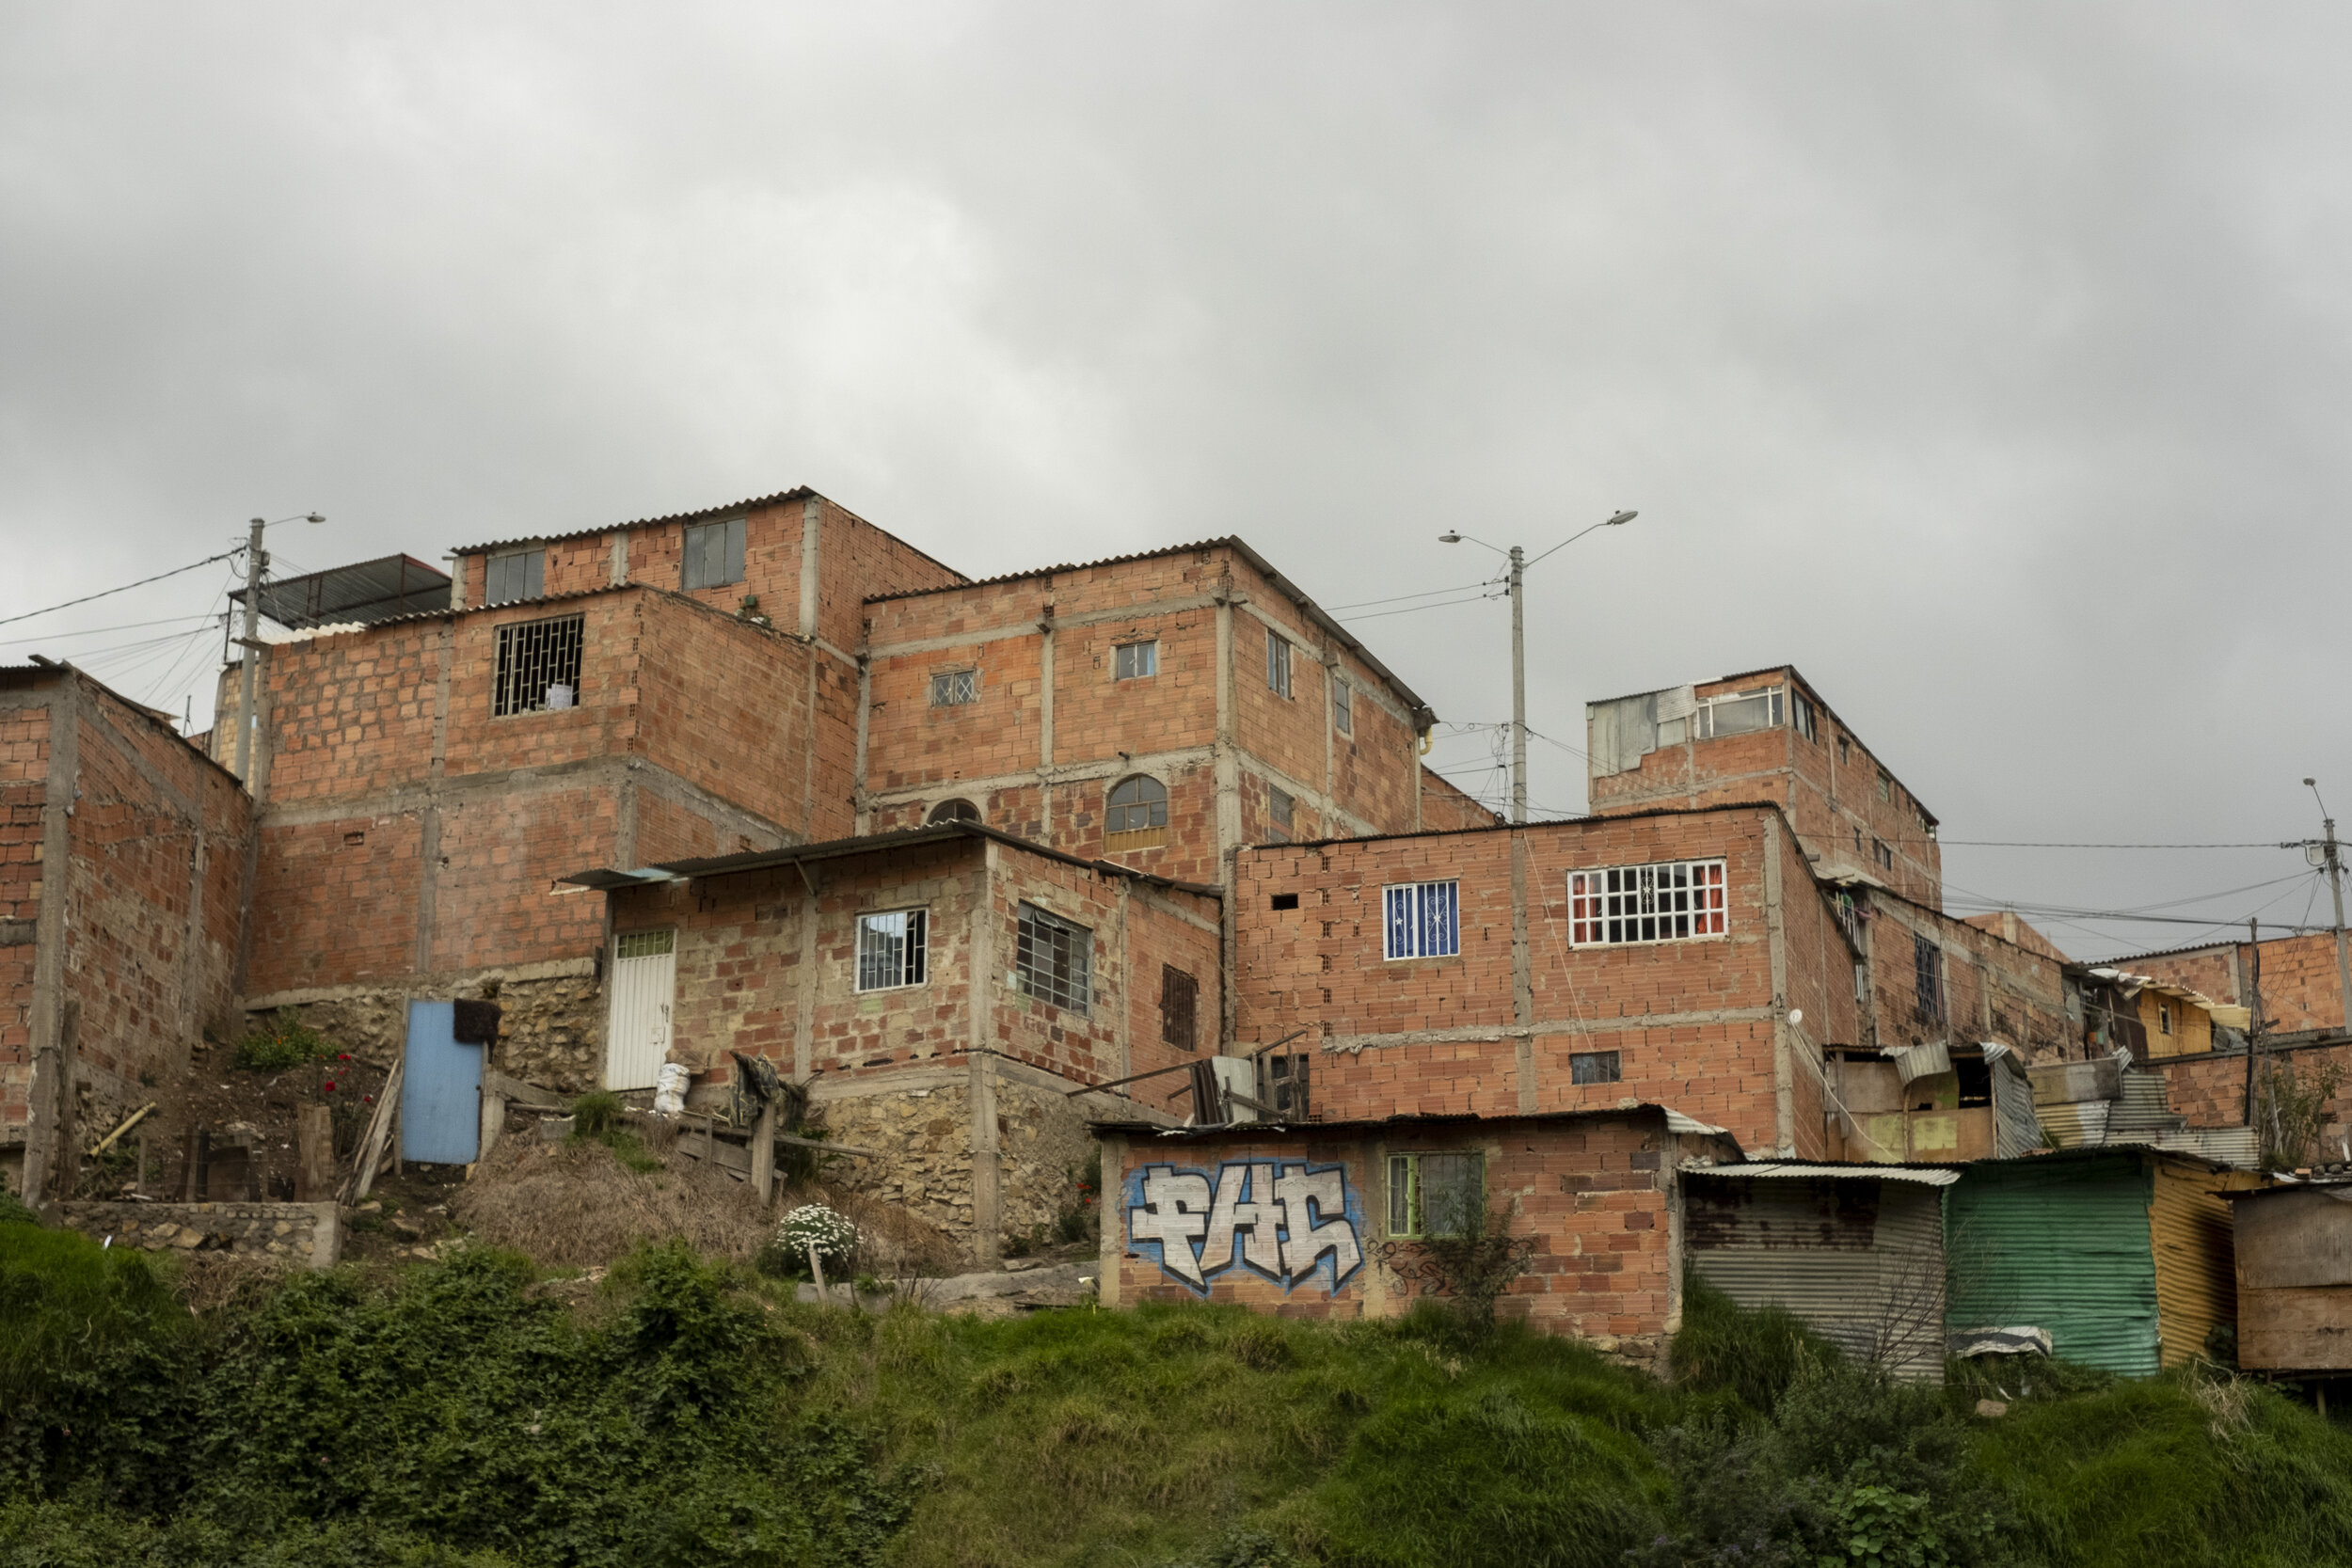  One of thousands of brick-clad homes constructed in Ciudad Bolivar by poor Colombian families fleeing political violence, land displacement, or simply better economic opportunies in Bogotá.  